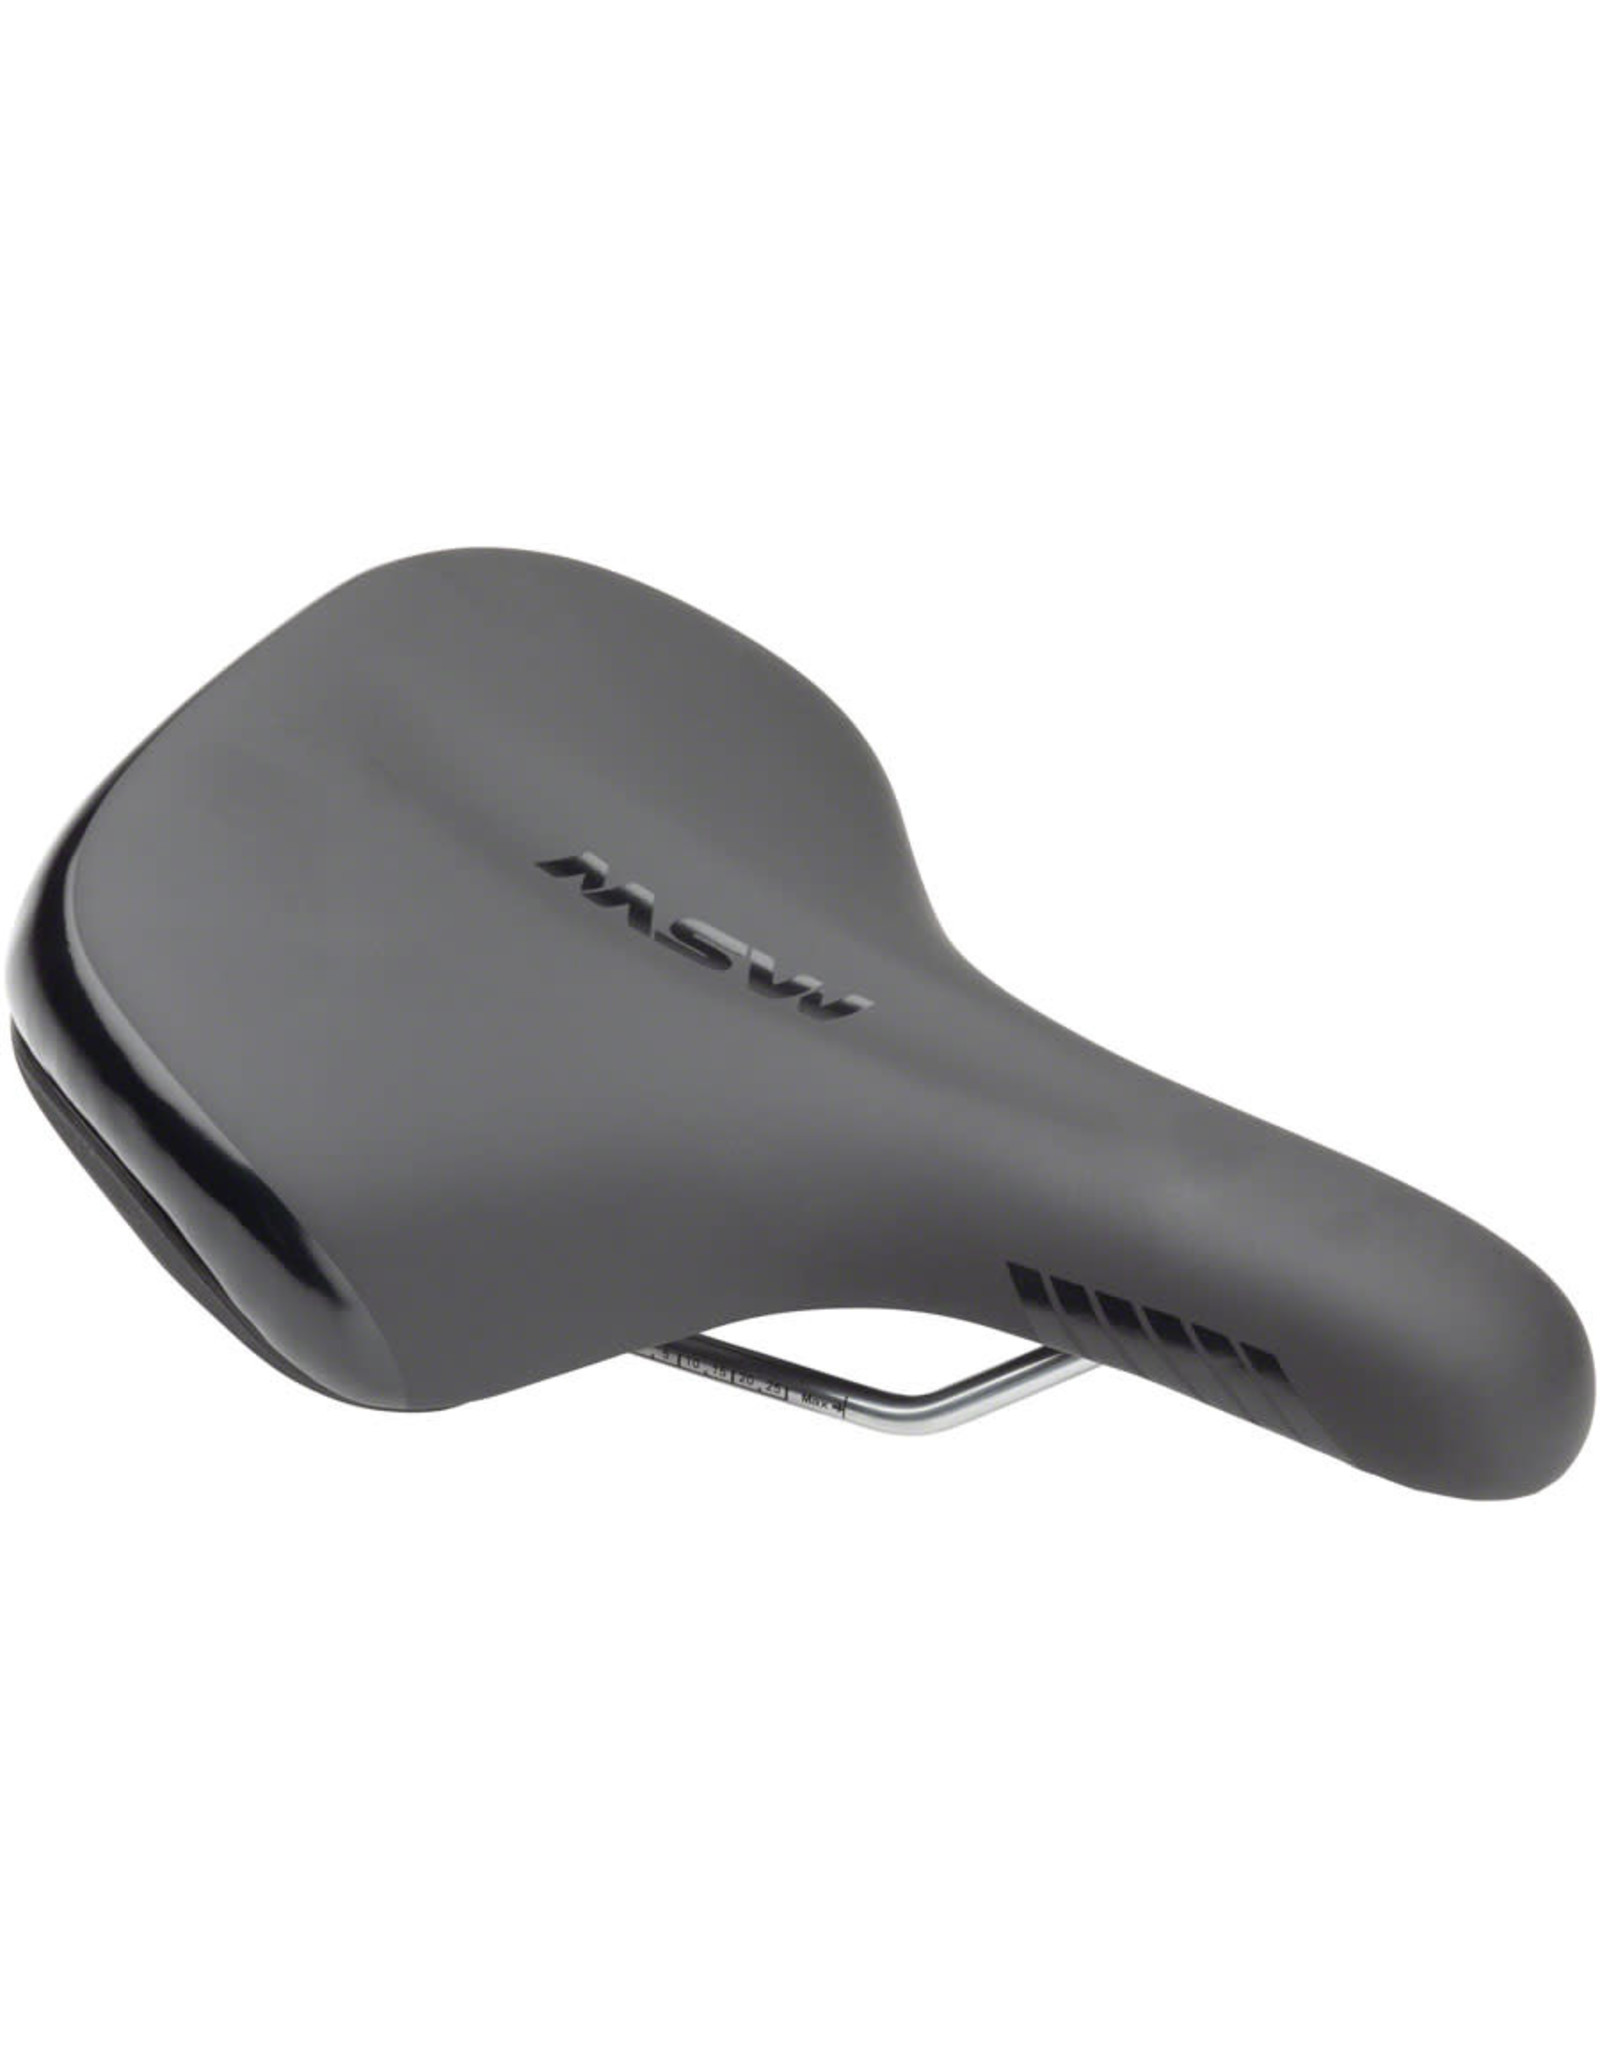 MSW MSW SDL-210 Relax Recreation Saddle - Steel, Black